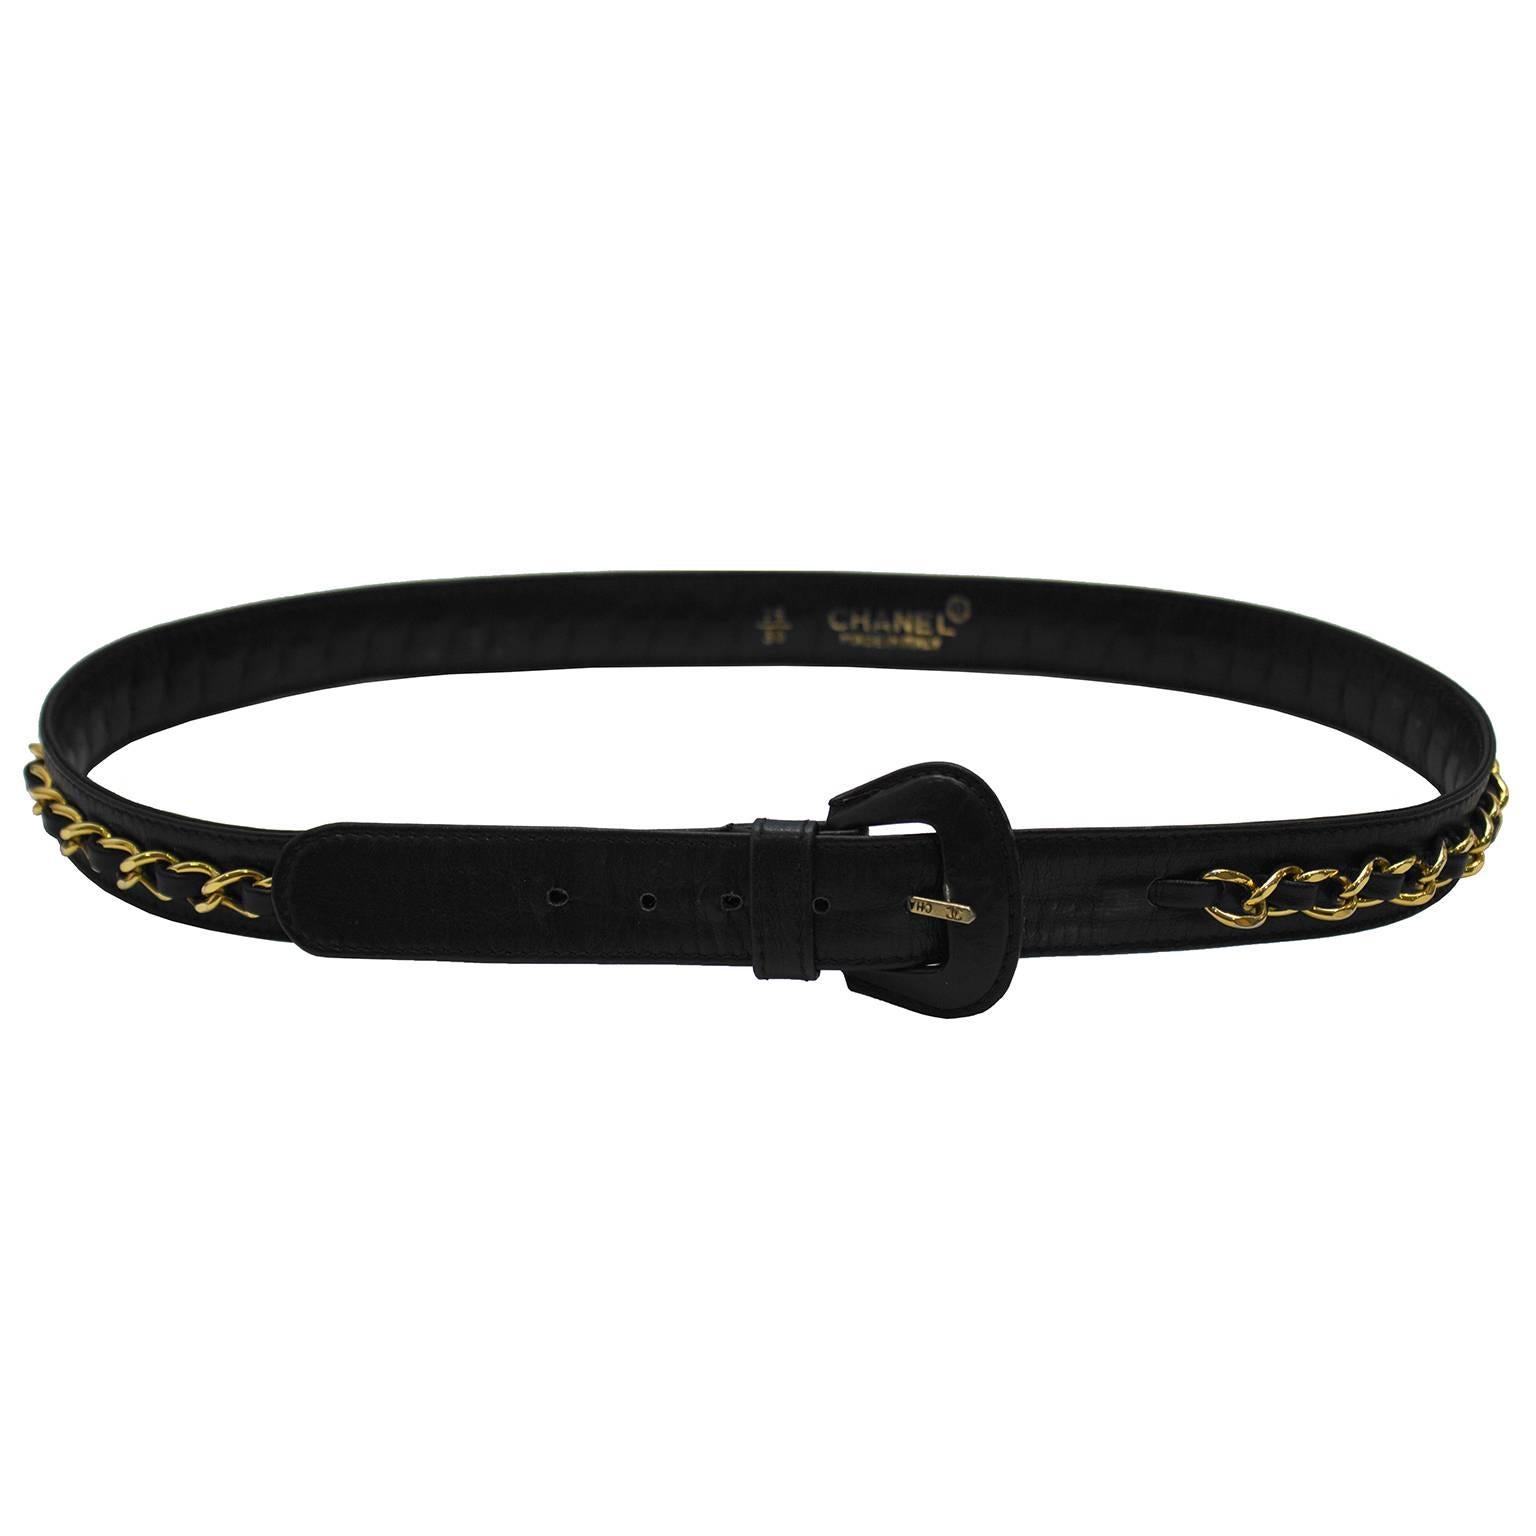 Classic Chanel black leather skinny belt with attached goldtone chain with woven leather detail. Leather covered buckle frame with CHANEL stamped on the goldtone prong. Meant to be worn cinched at the waist, stamped CHANEL on the inside of the belt